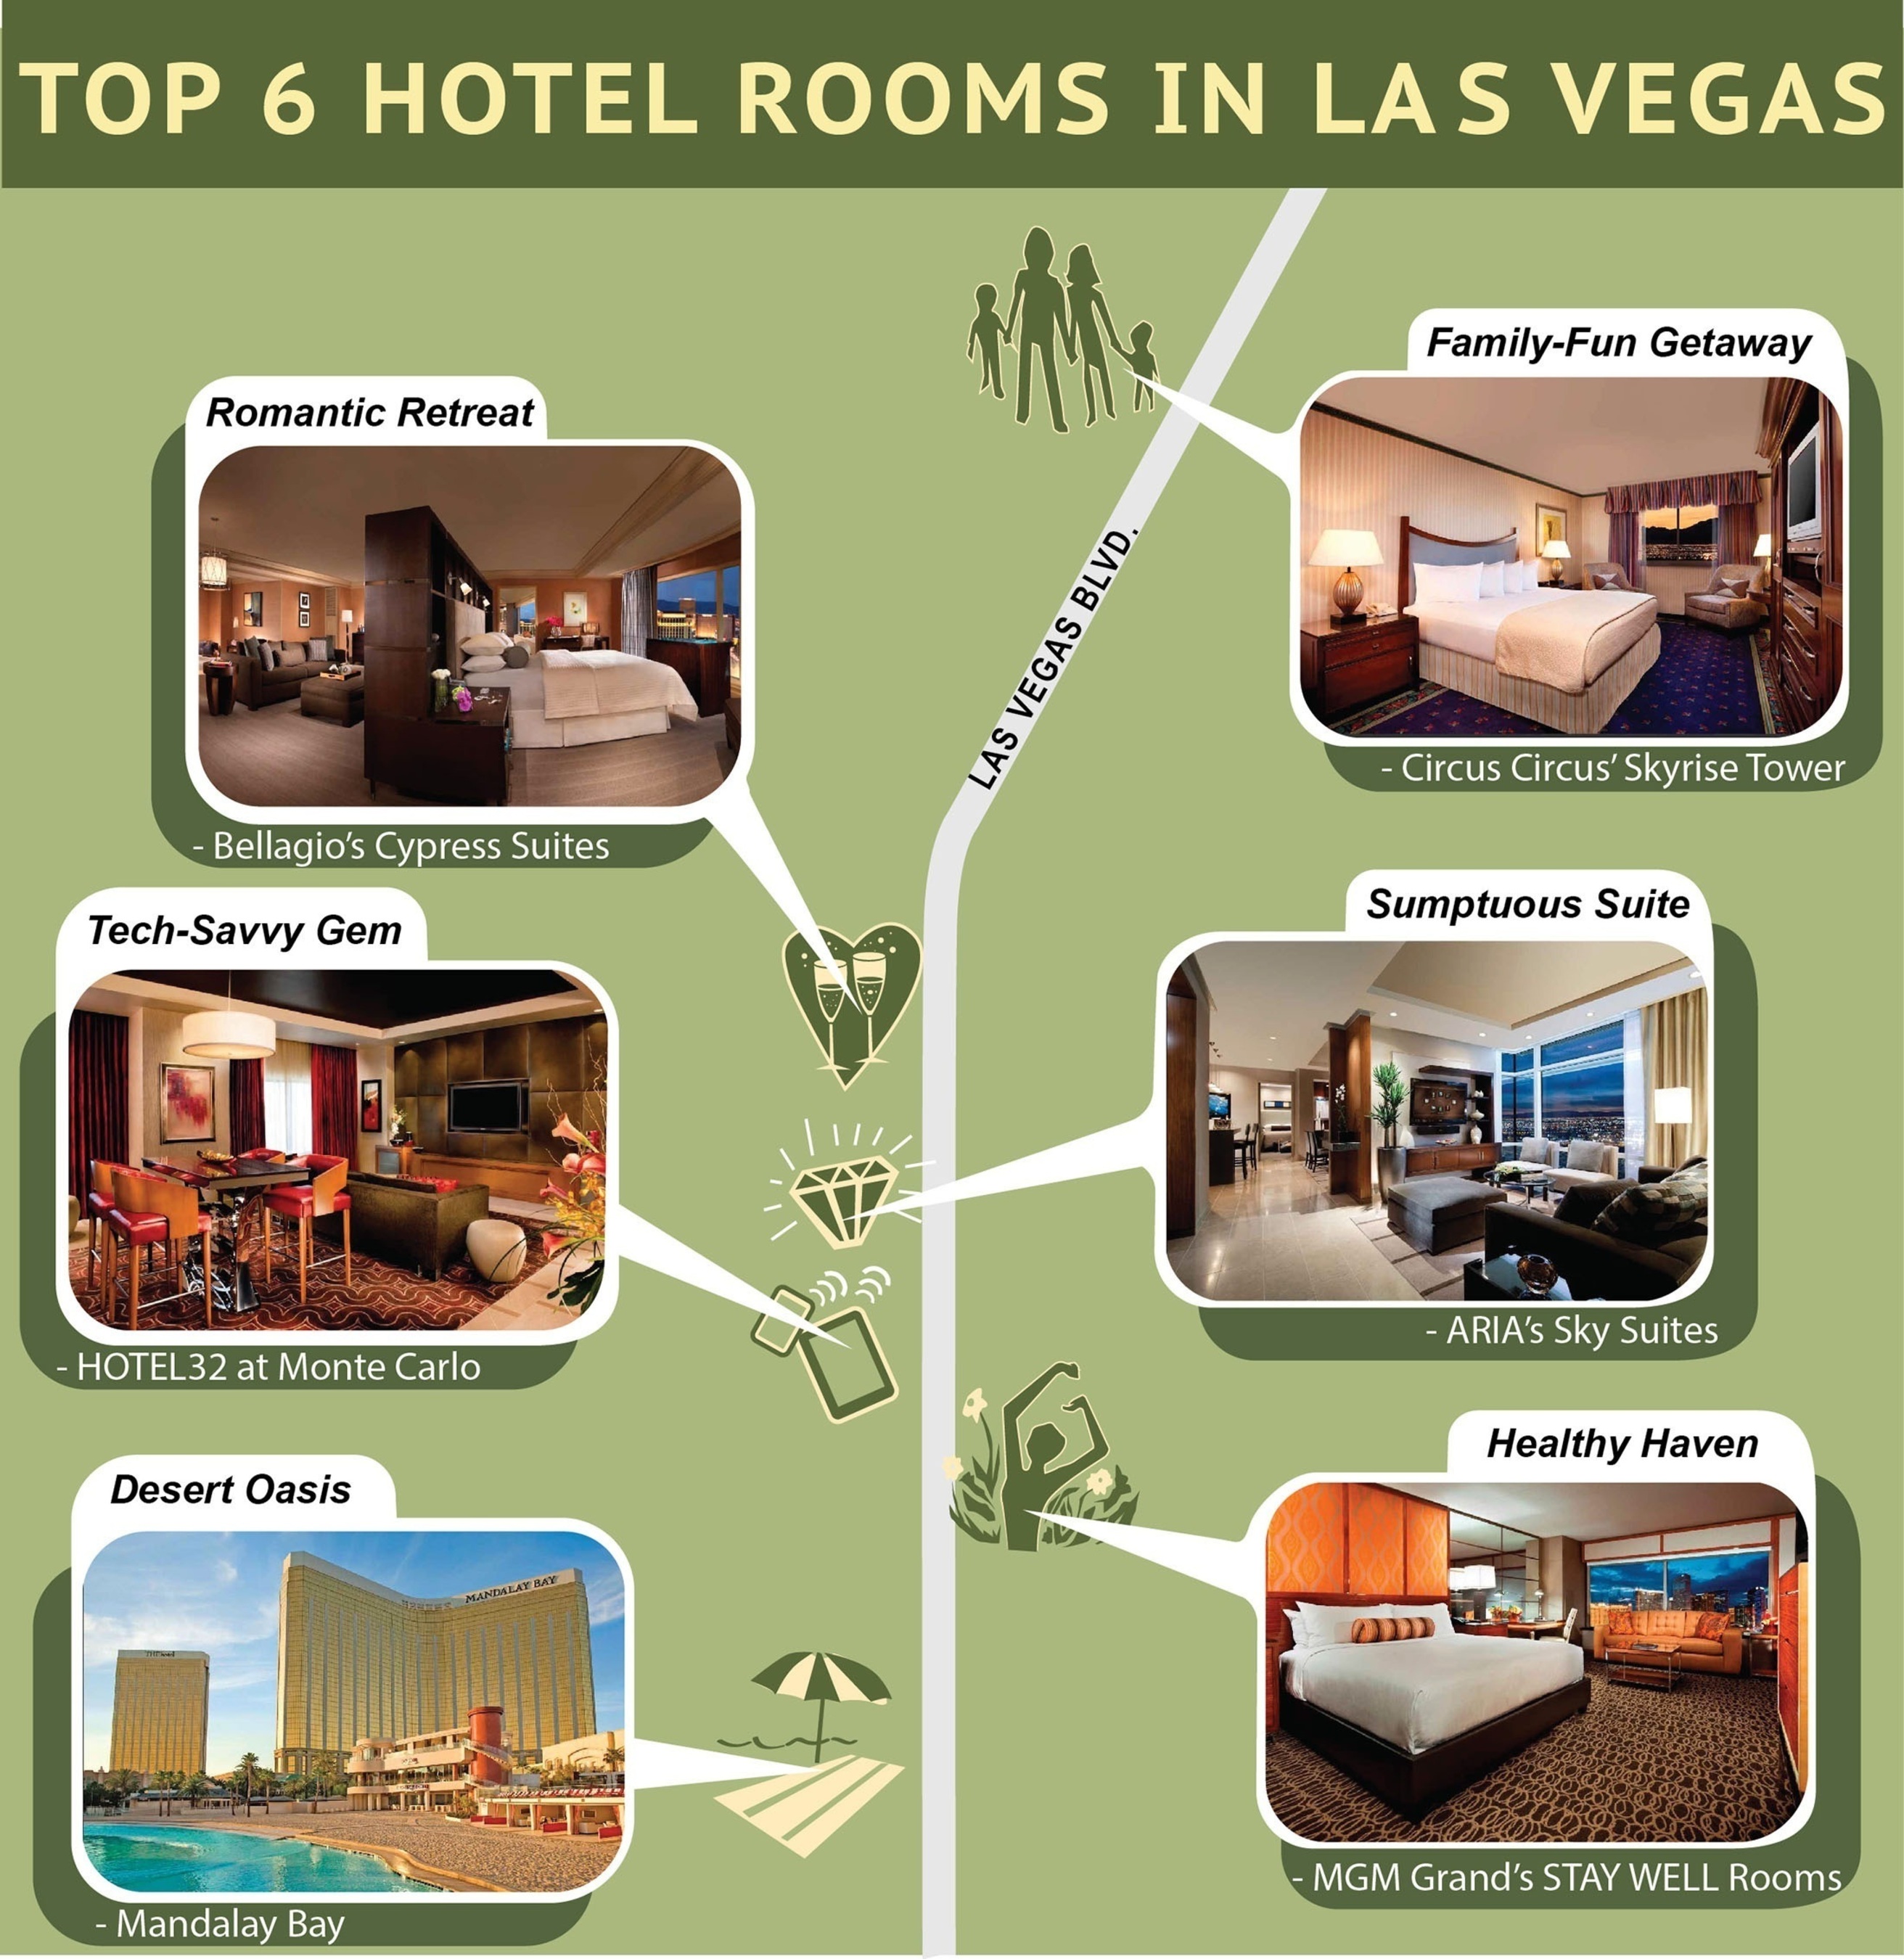 Best hotels for healthy travelers, families, luxury lovers, tech-savvy vacationers, romantic couples and beach-goers in Las Vegas. (PRNewsFoto/MGM Resorts International)